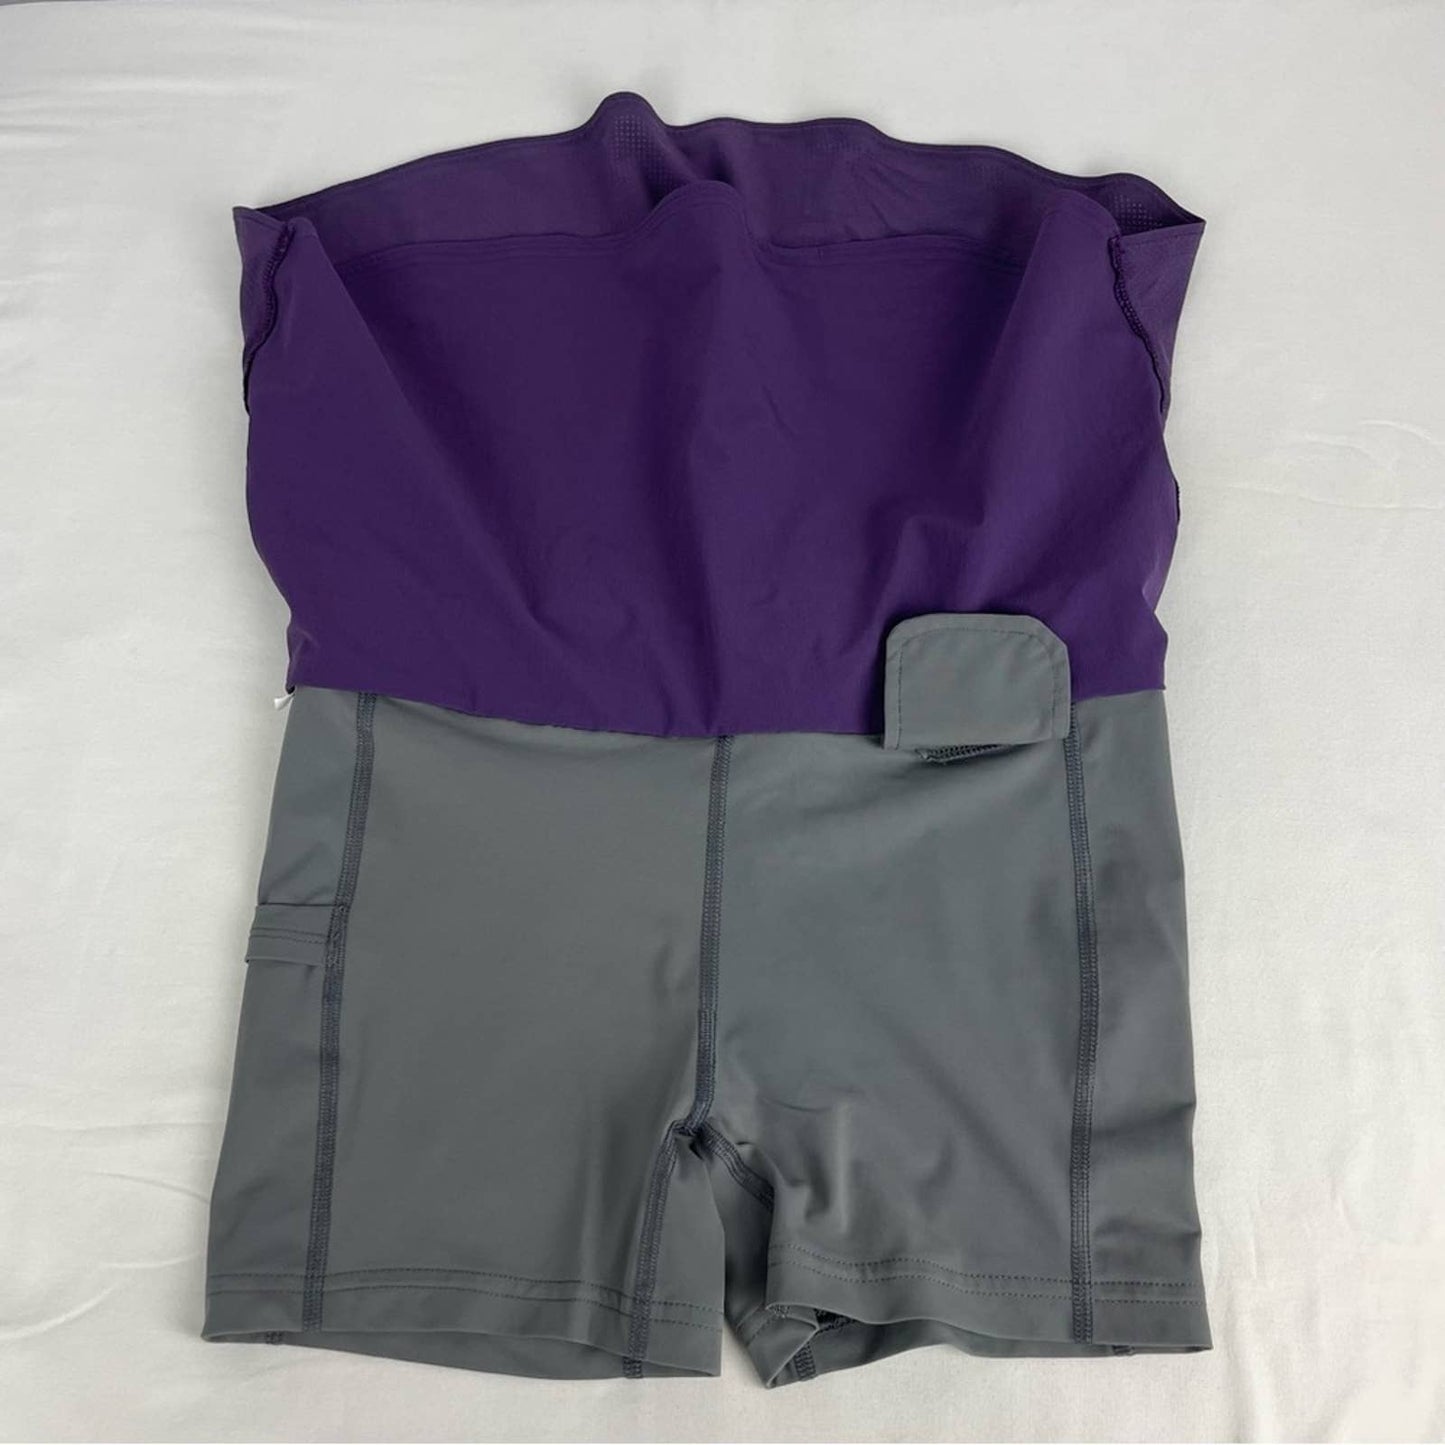 Outdoor Voices The Exercise Skort Indigo Eggplant Purple Active Athletic Skirt Size S